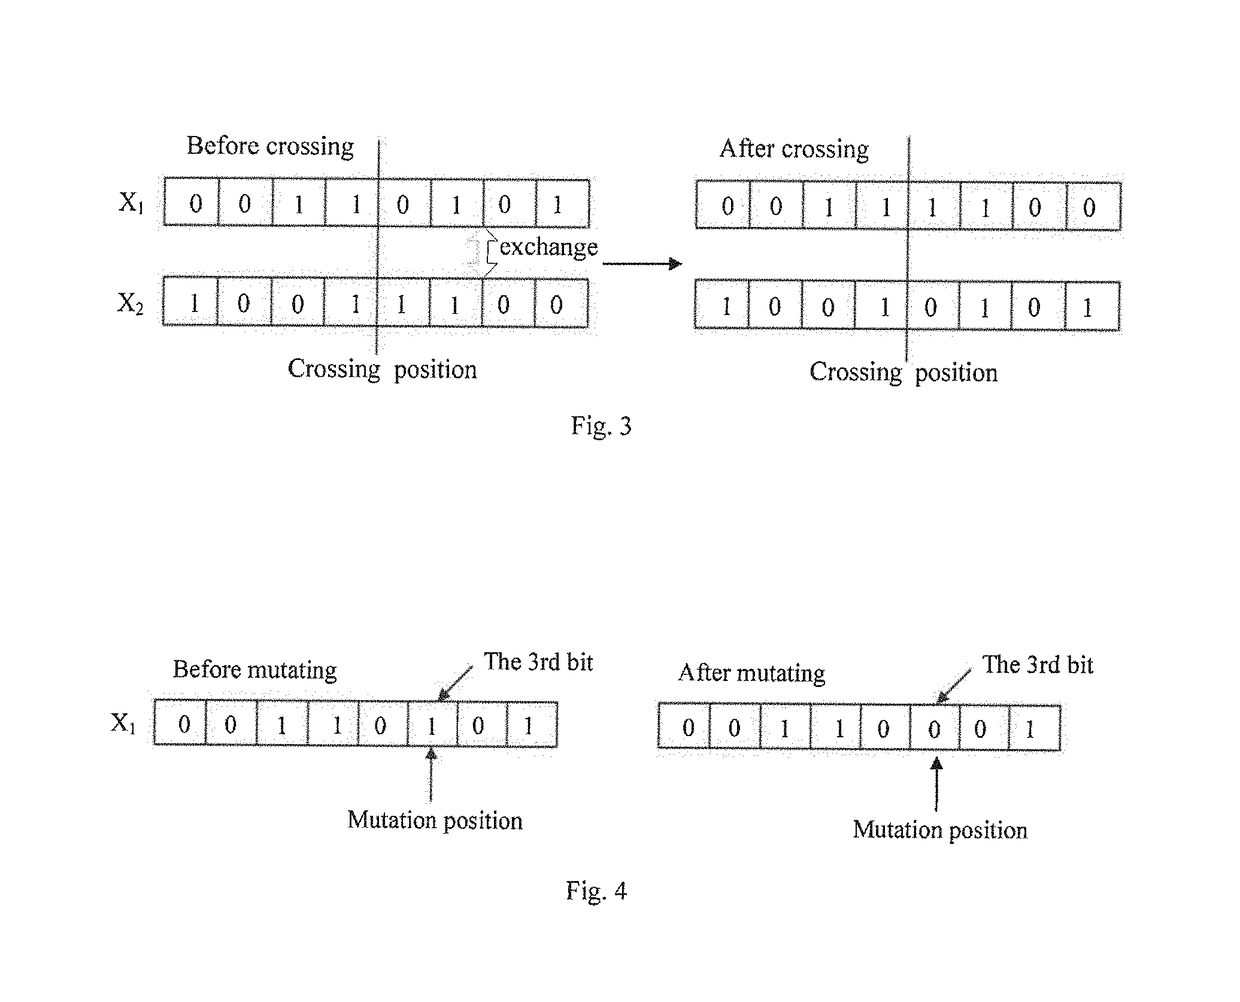 Method for automatically separating out the defect image from a thermogram sequence